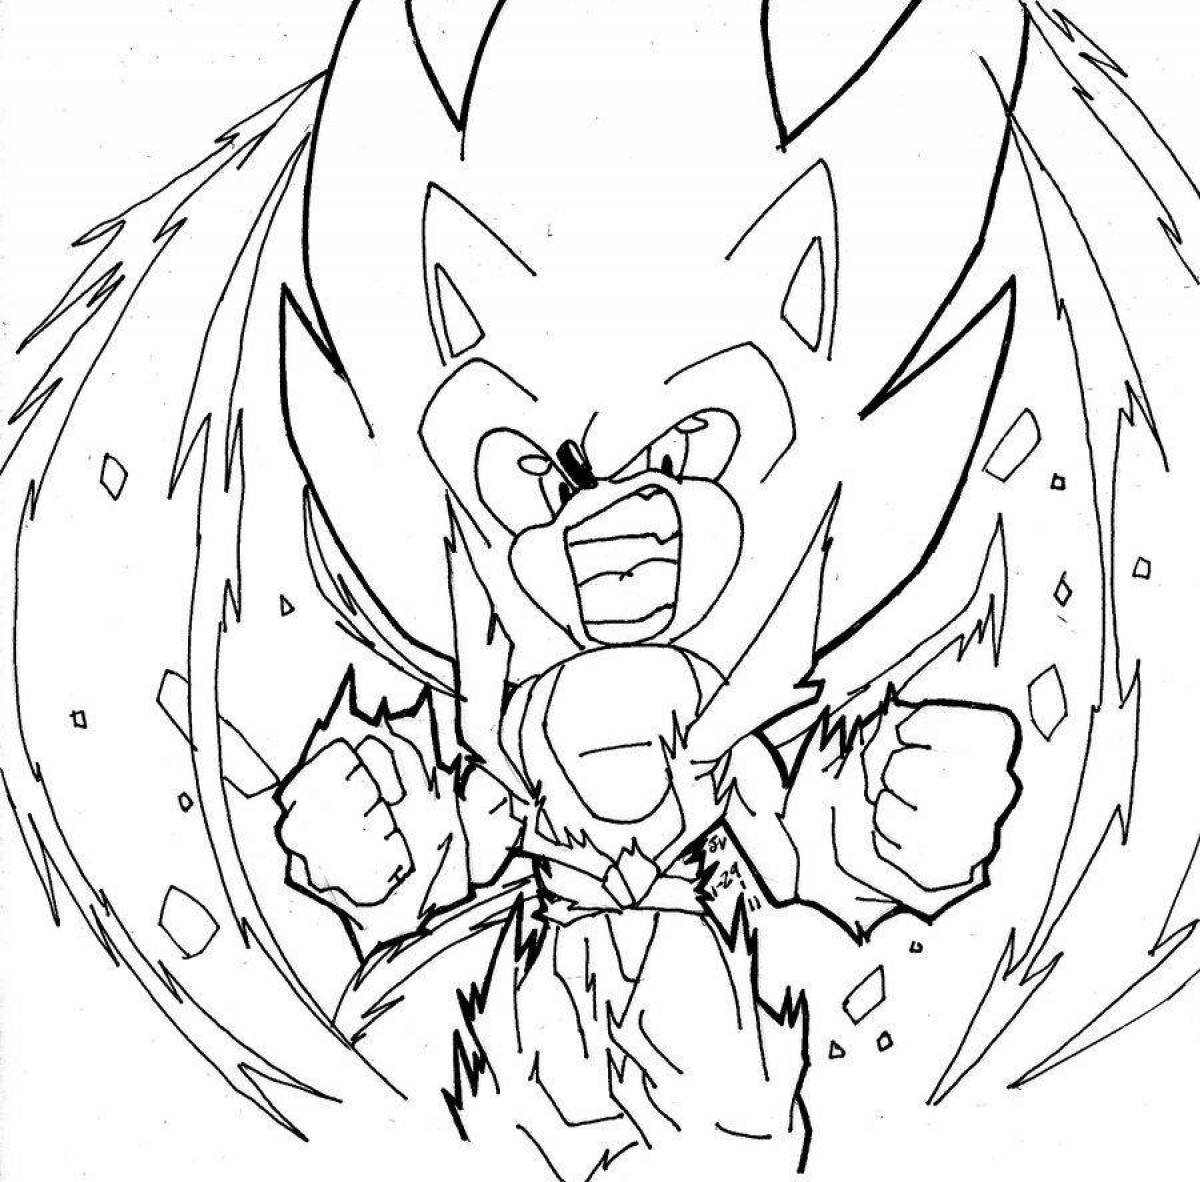 Awesome dark sonic coloring page